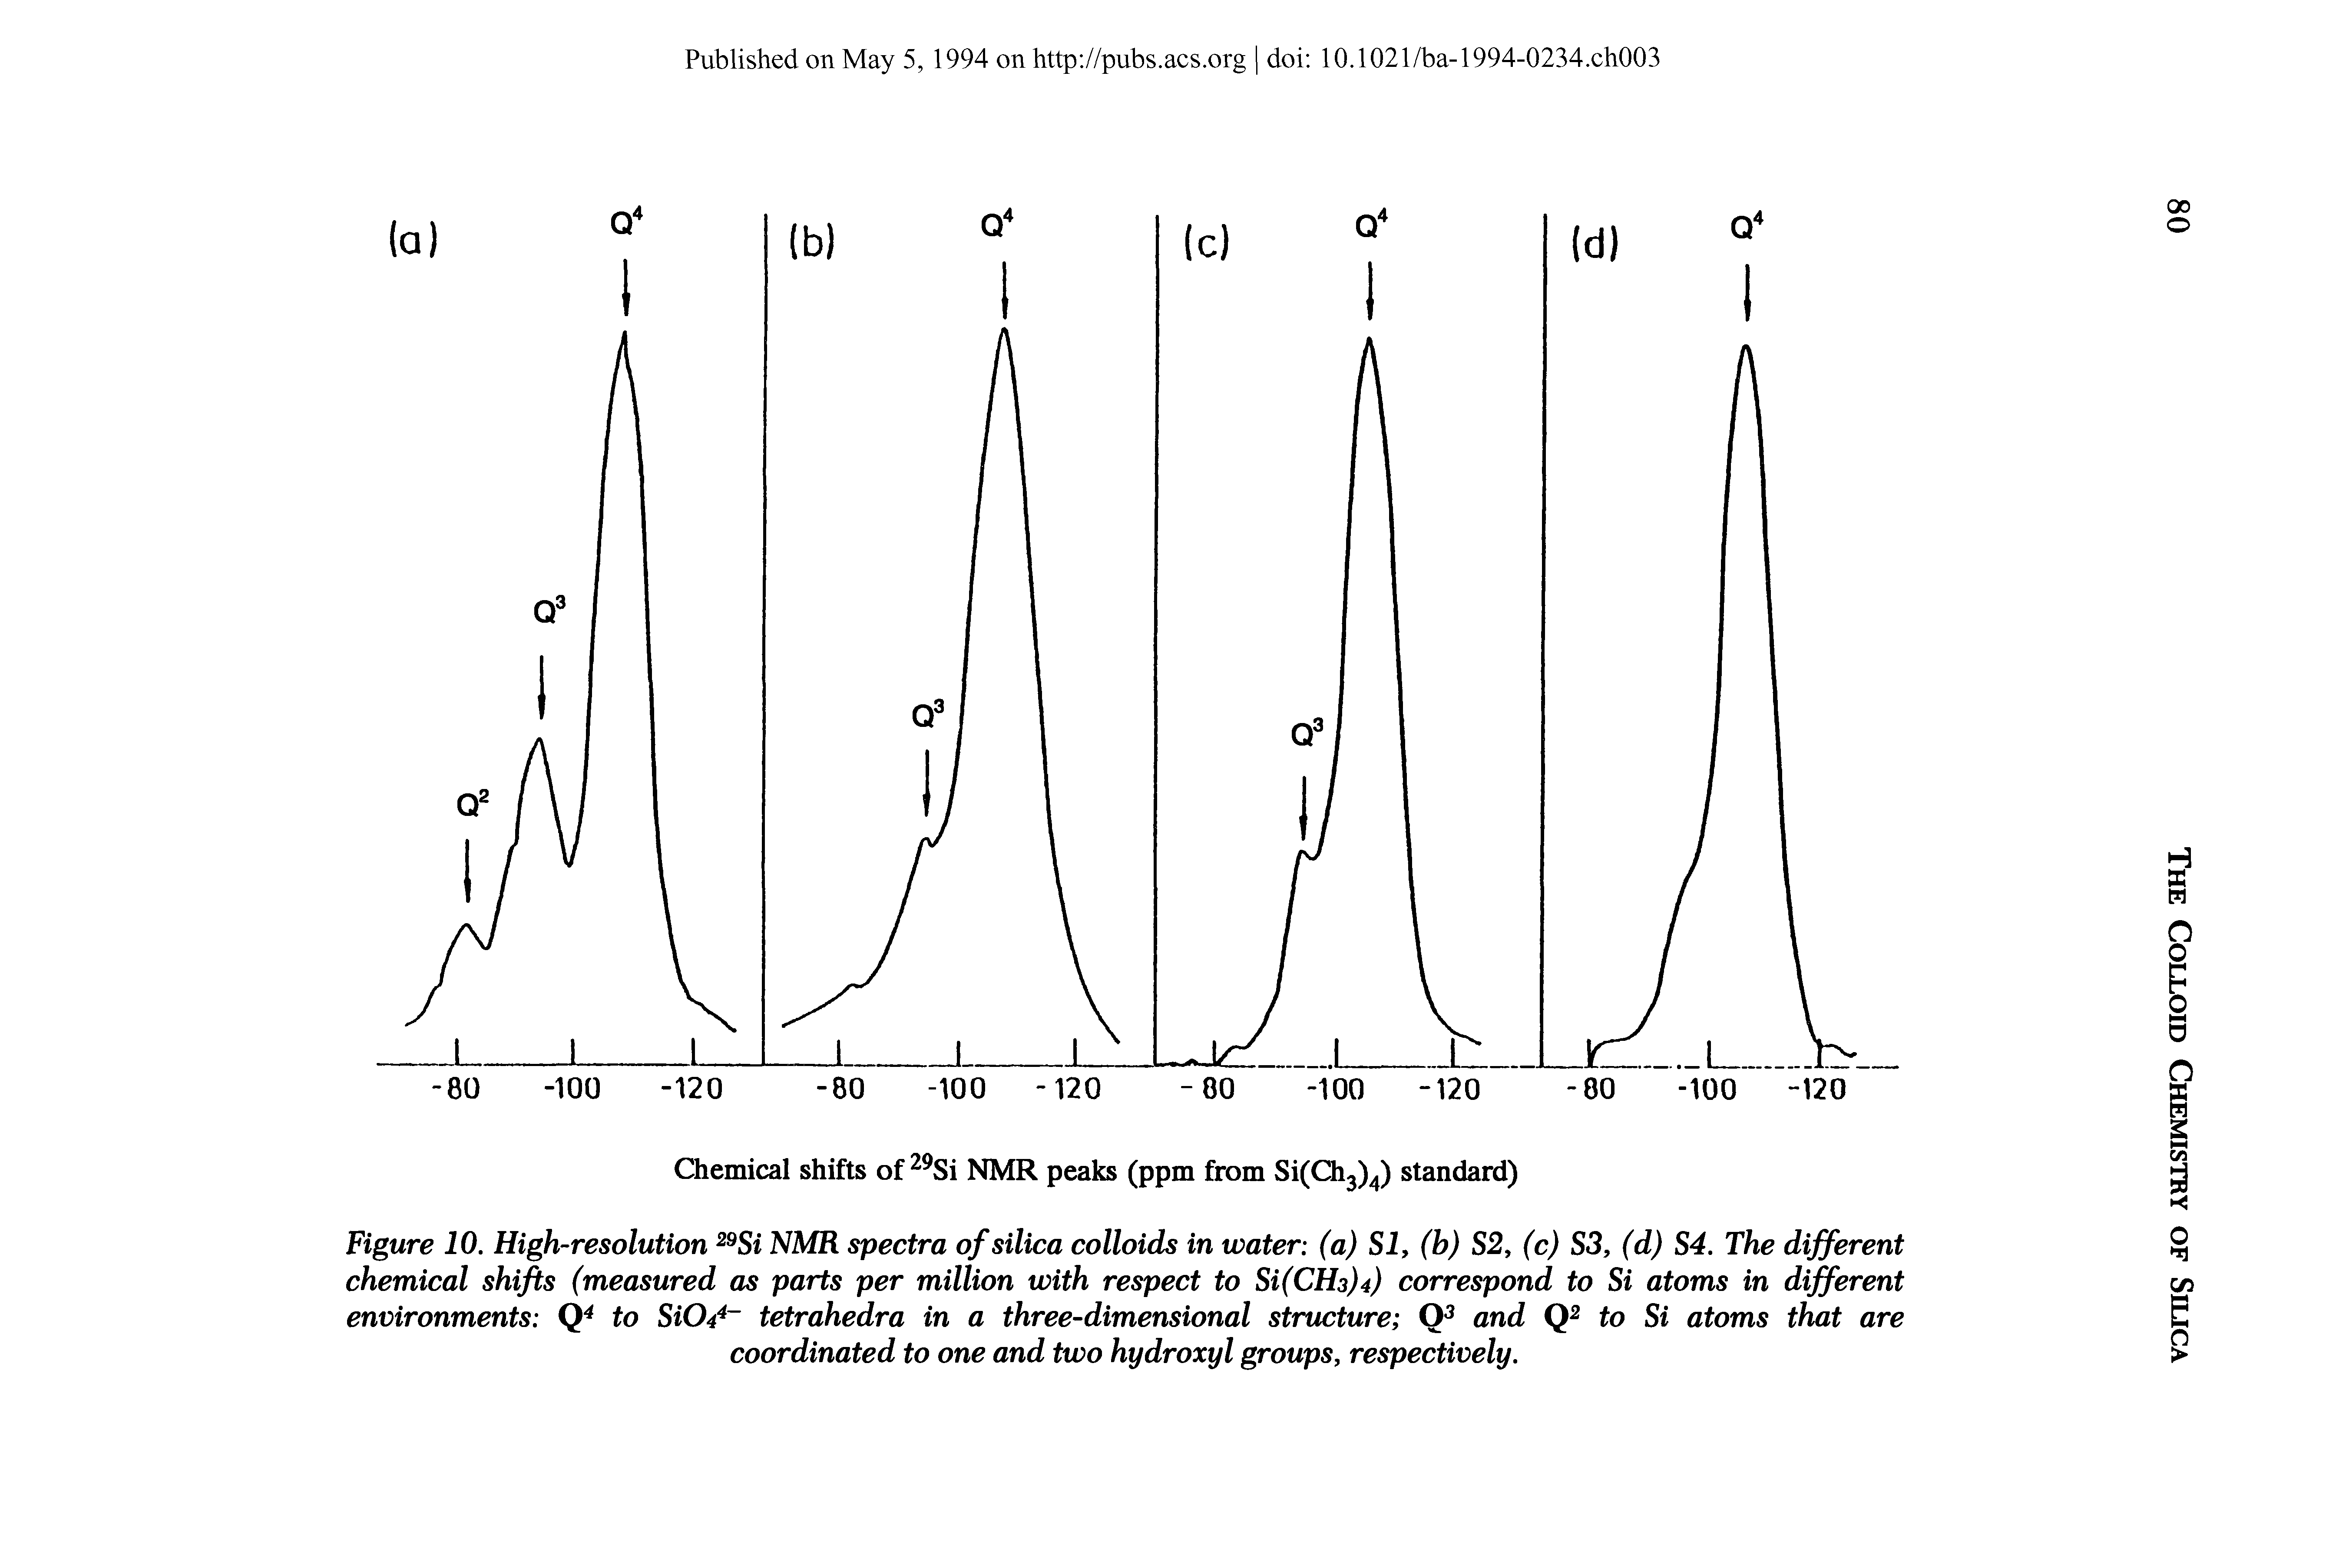 Figure 10. High-resolution 29Si NMR spectra of silica colloids in water (a) Si, (b) S2, (c) S3, (d) S4. The different chemical shifts (measured as parts per million with respect to correspond to Si atoms in different...